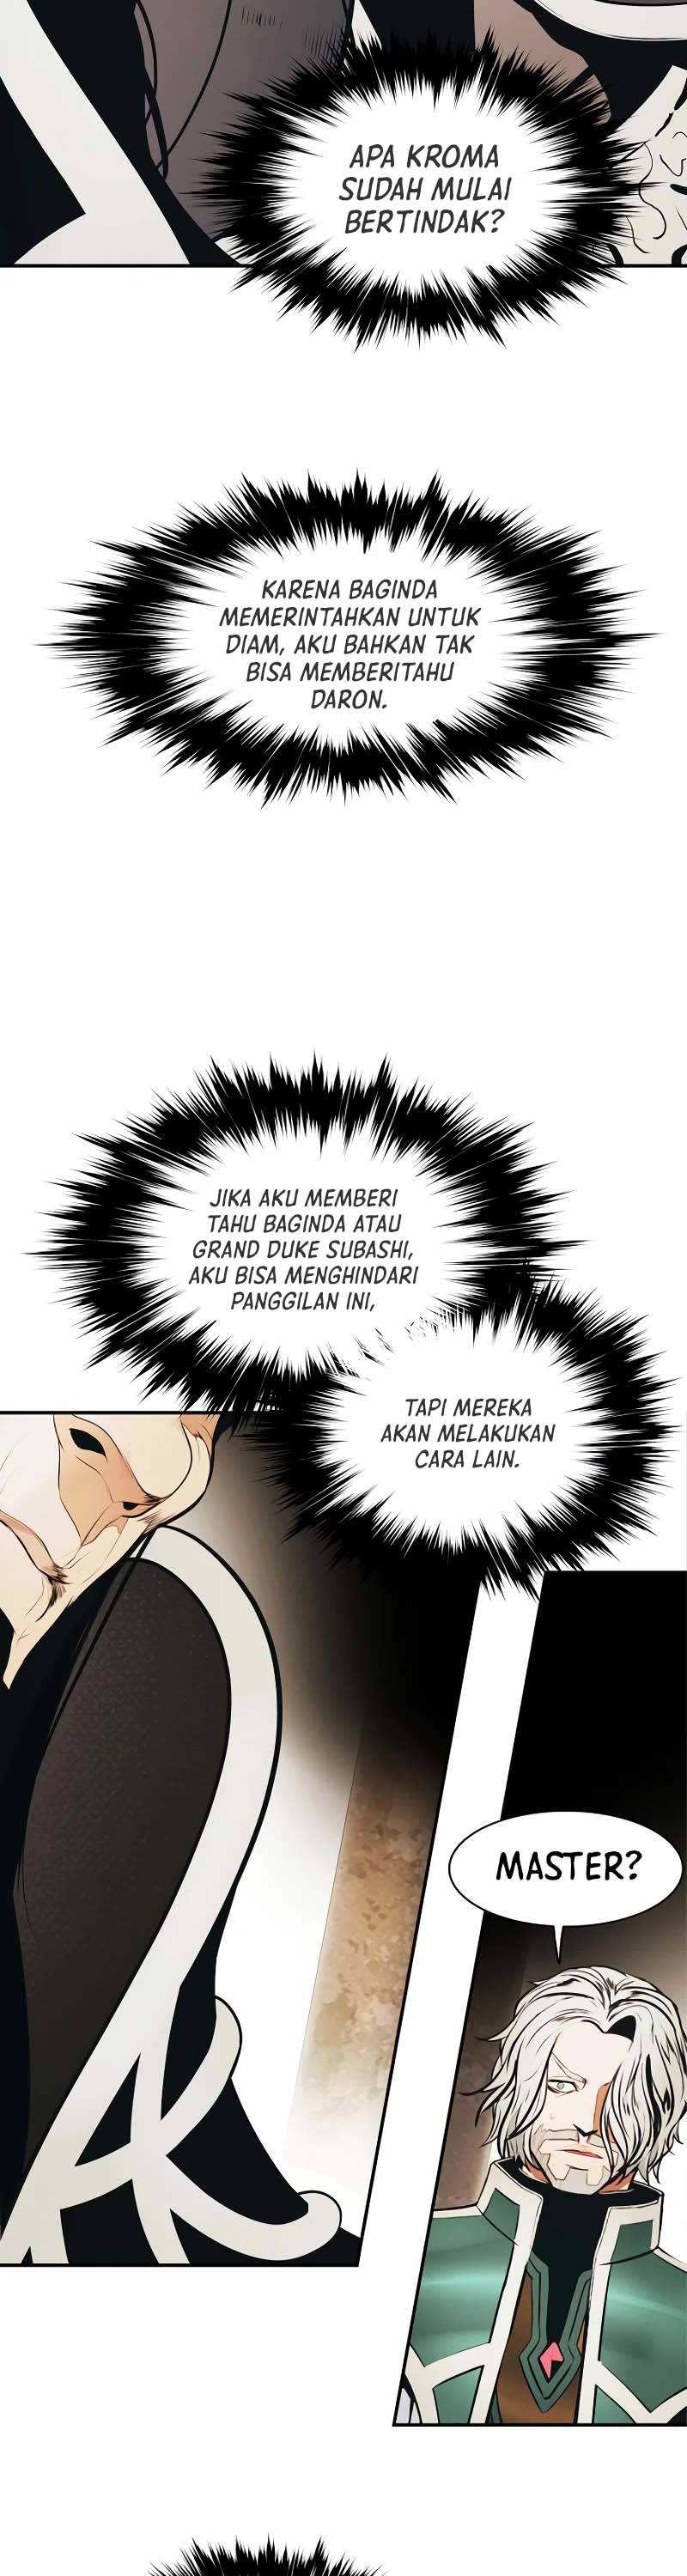 Mookhyang Dark Lady Chapter 168